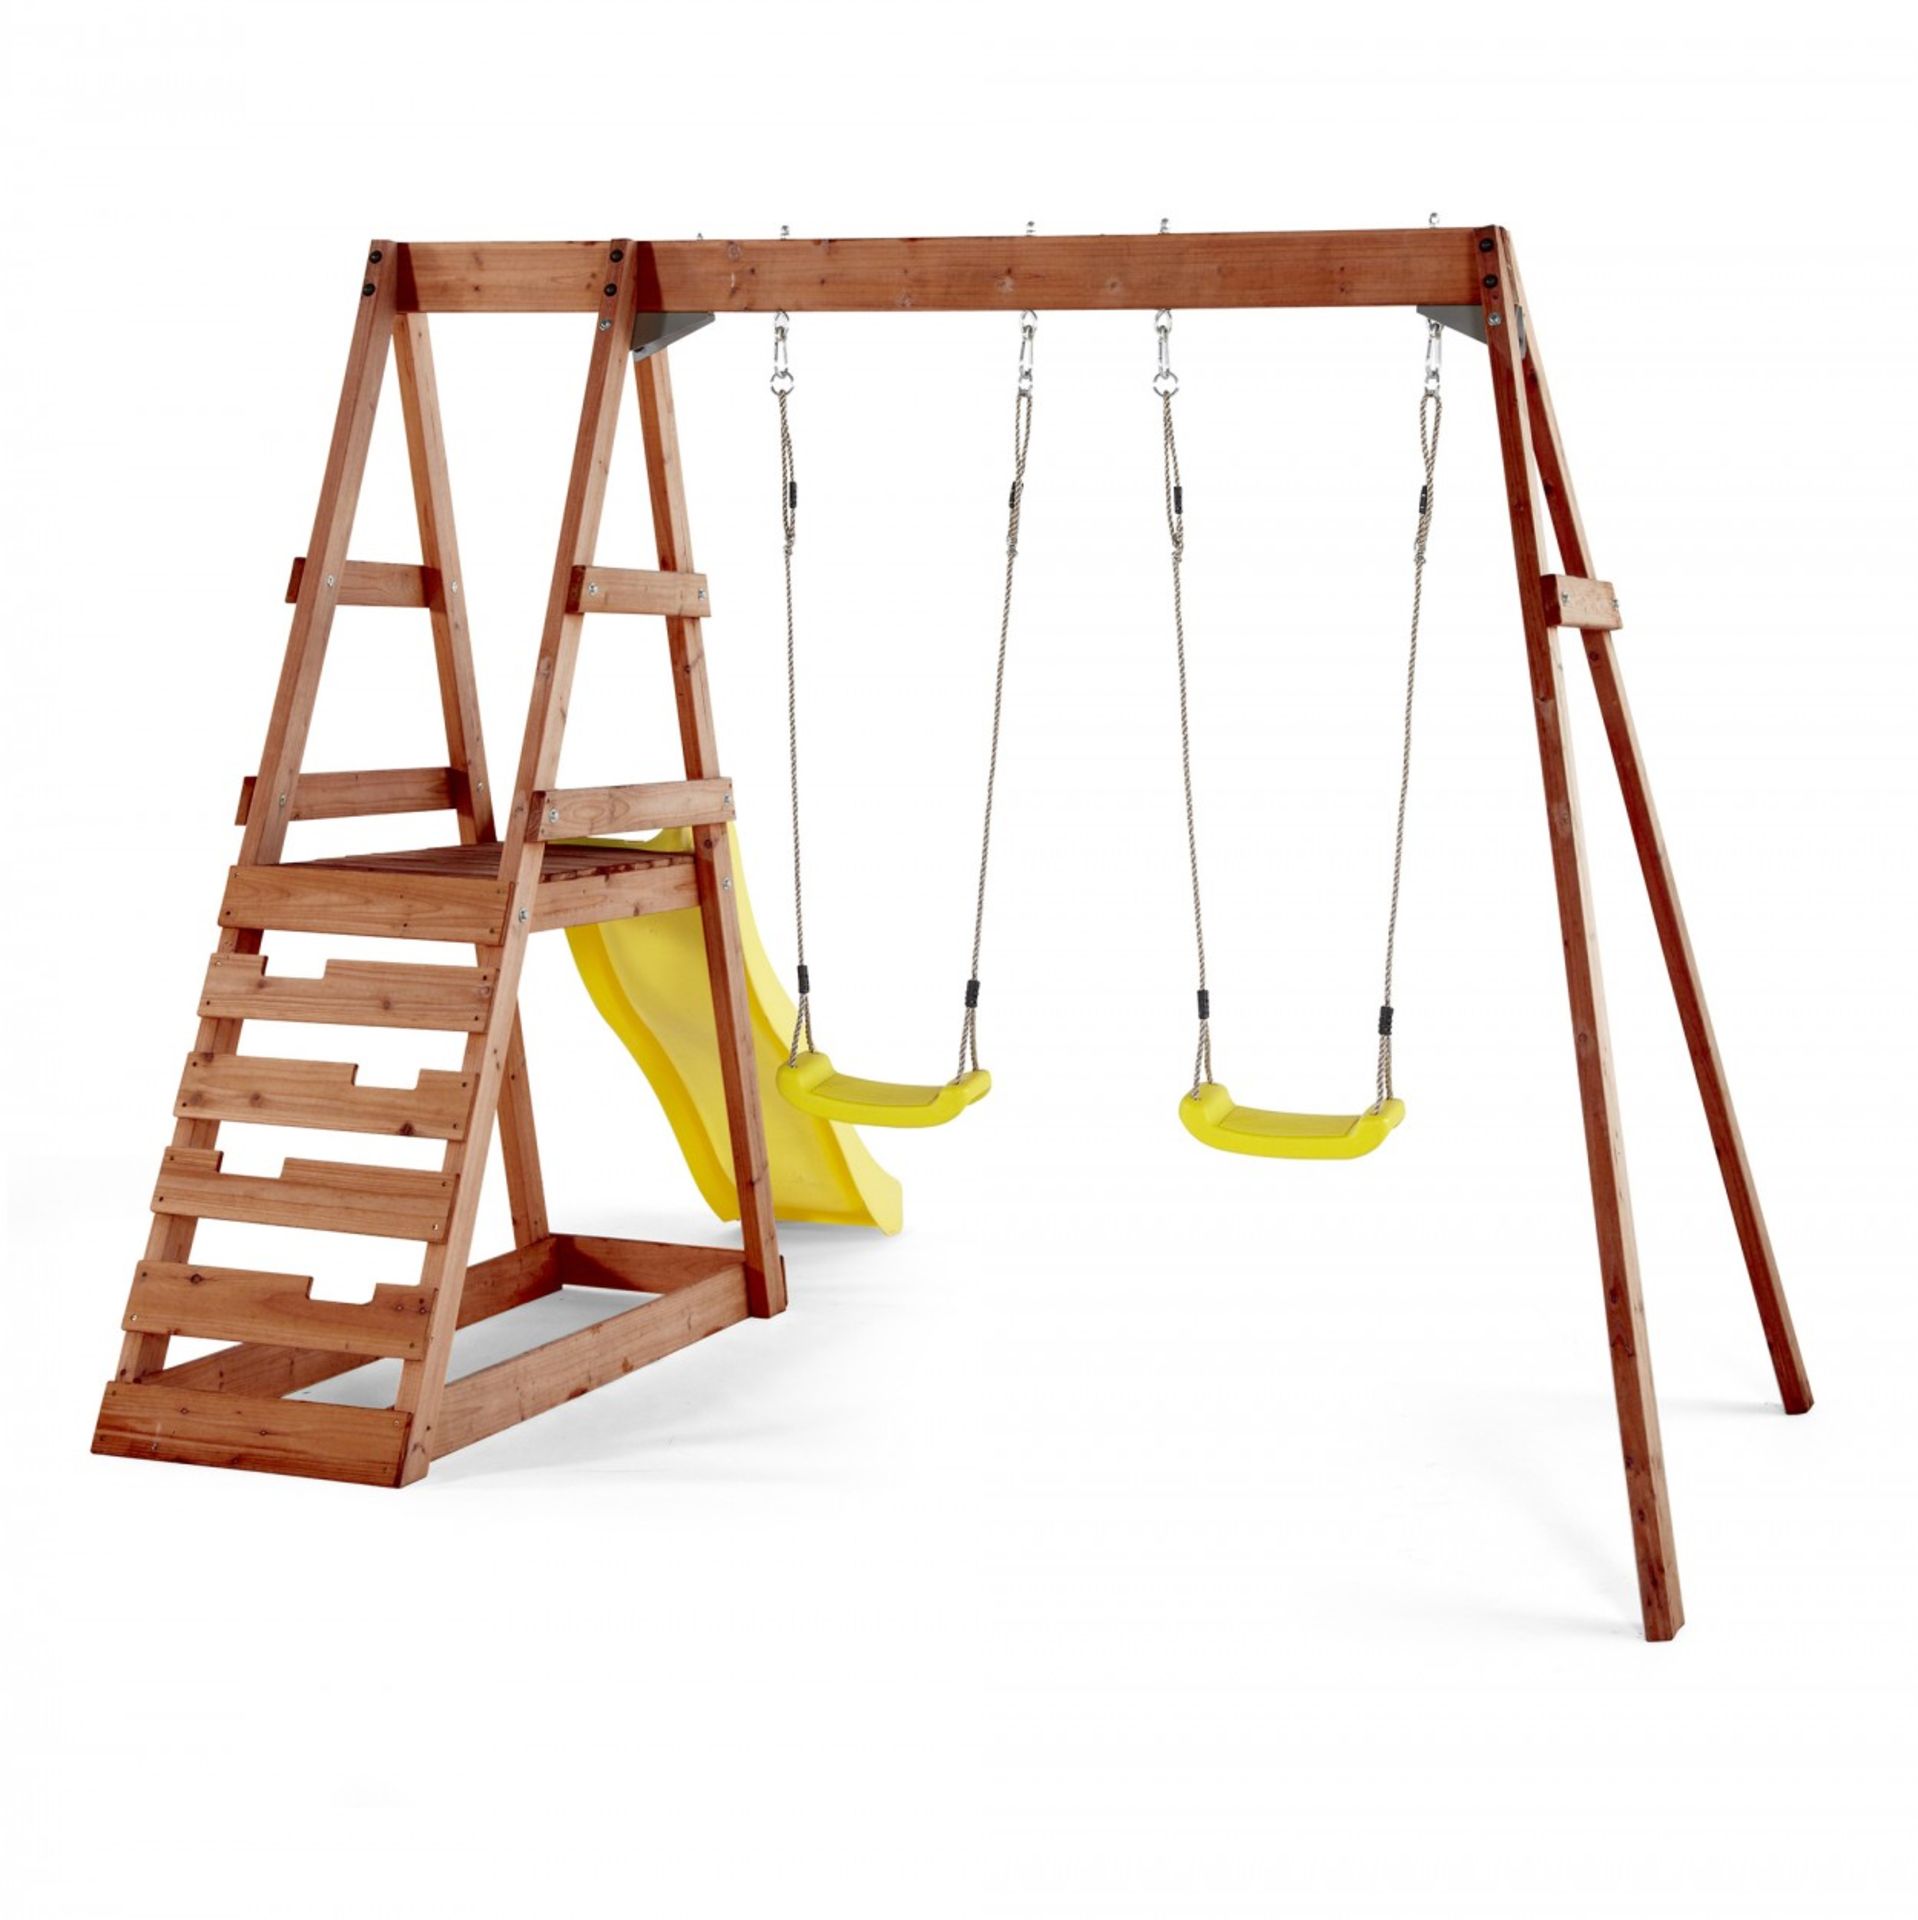 1 x Plum Double Swing with Glider Wooden Garden Swing Set. RRP £249.99. A fabulous swing set for - Image 4 of 6